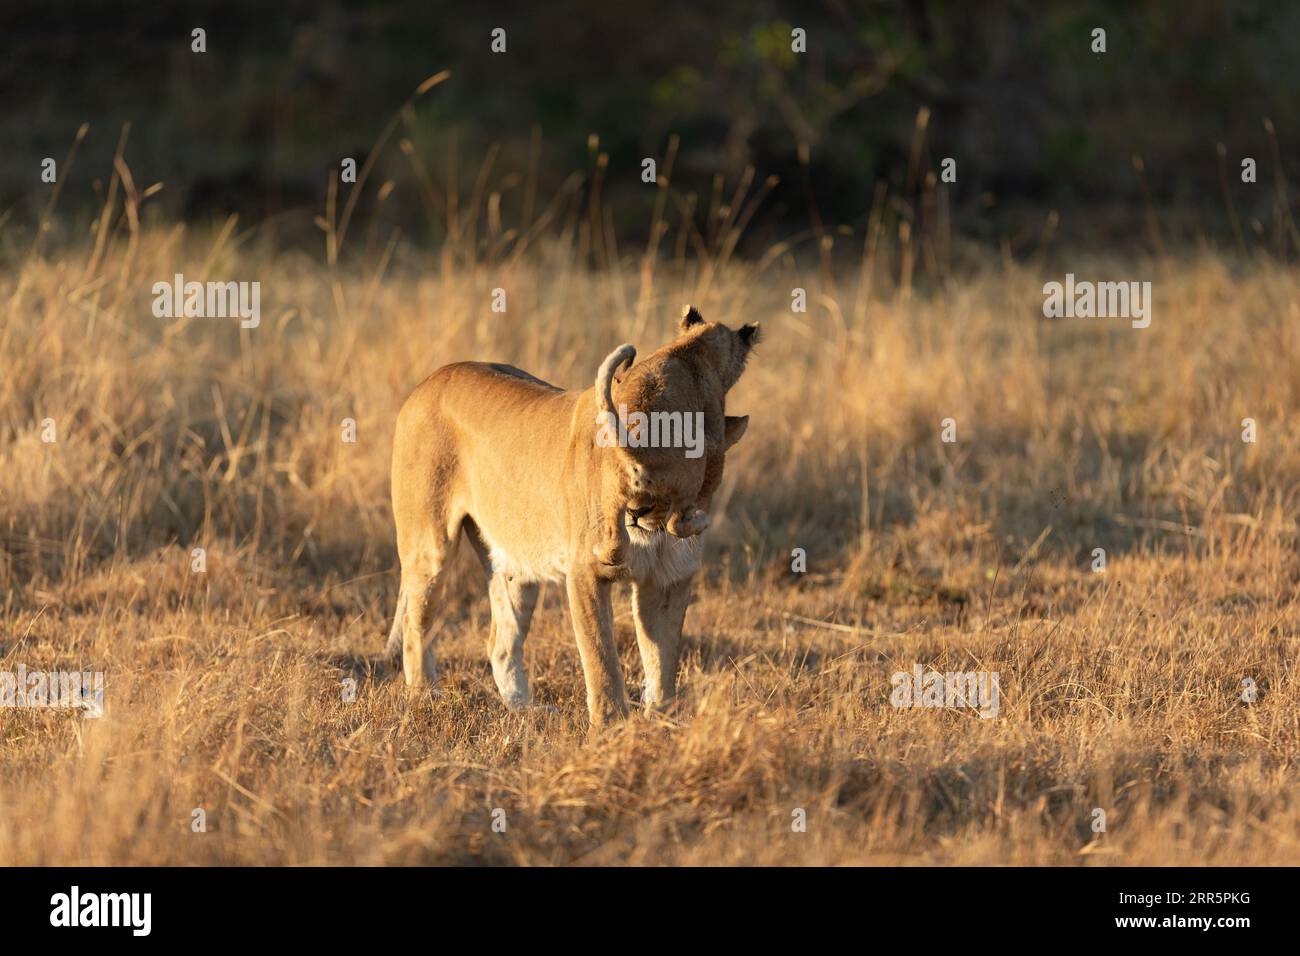 A lioness plays with her young cub in the open savannah of the Okavango Delta. Botswana. Stock Photo